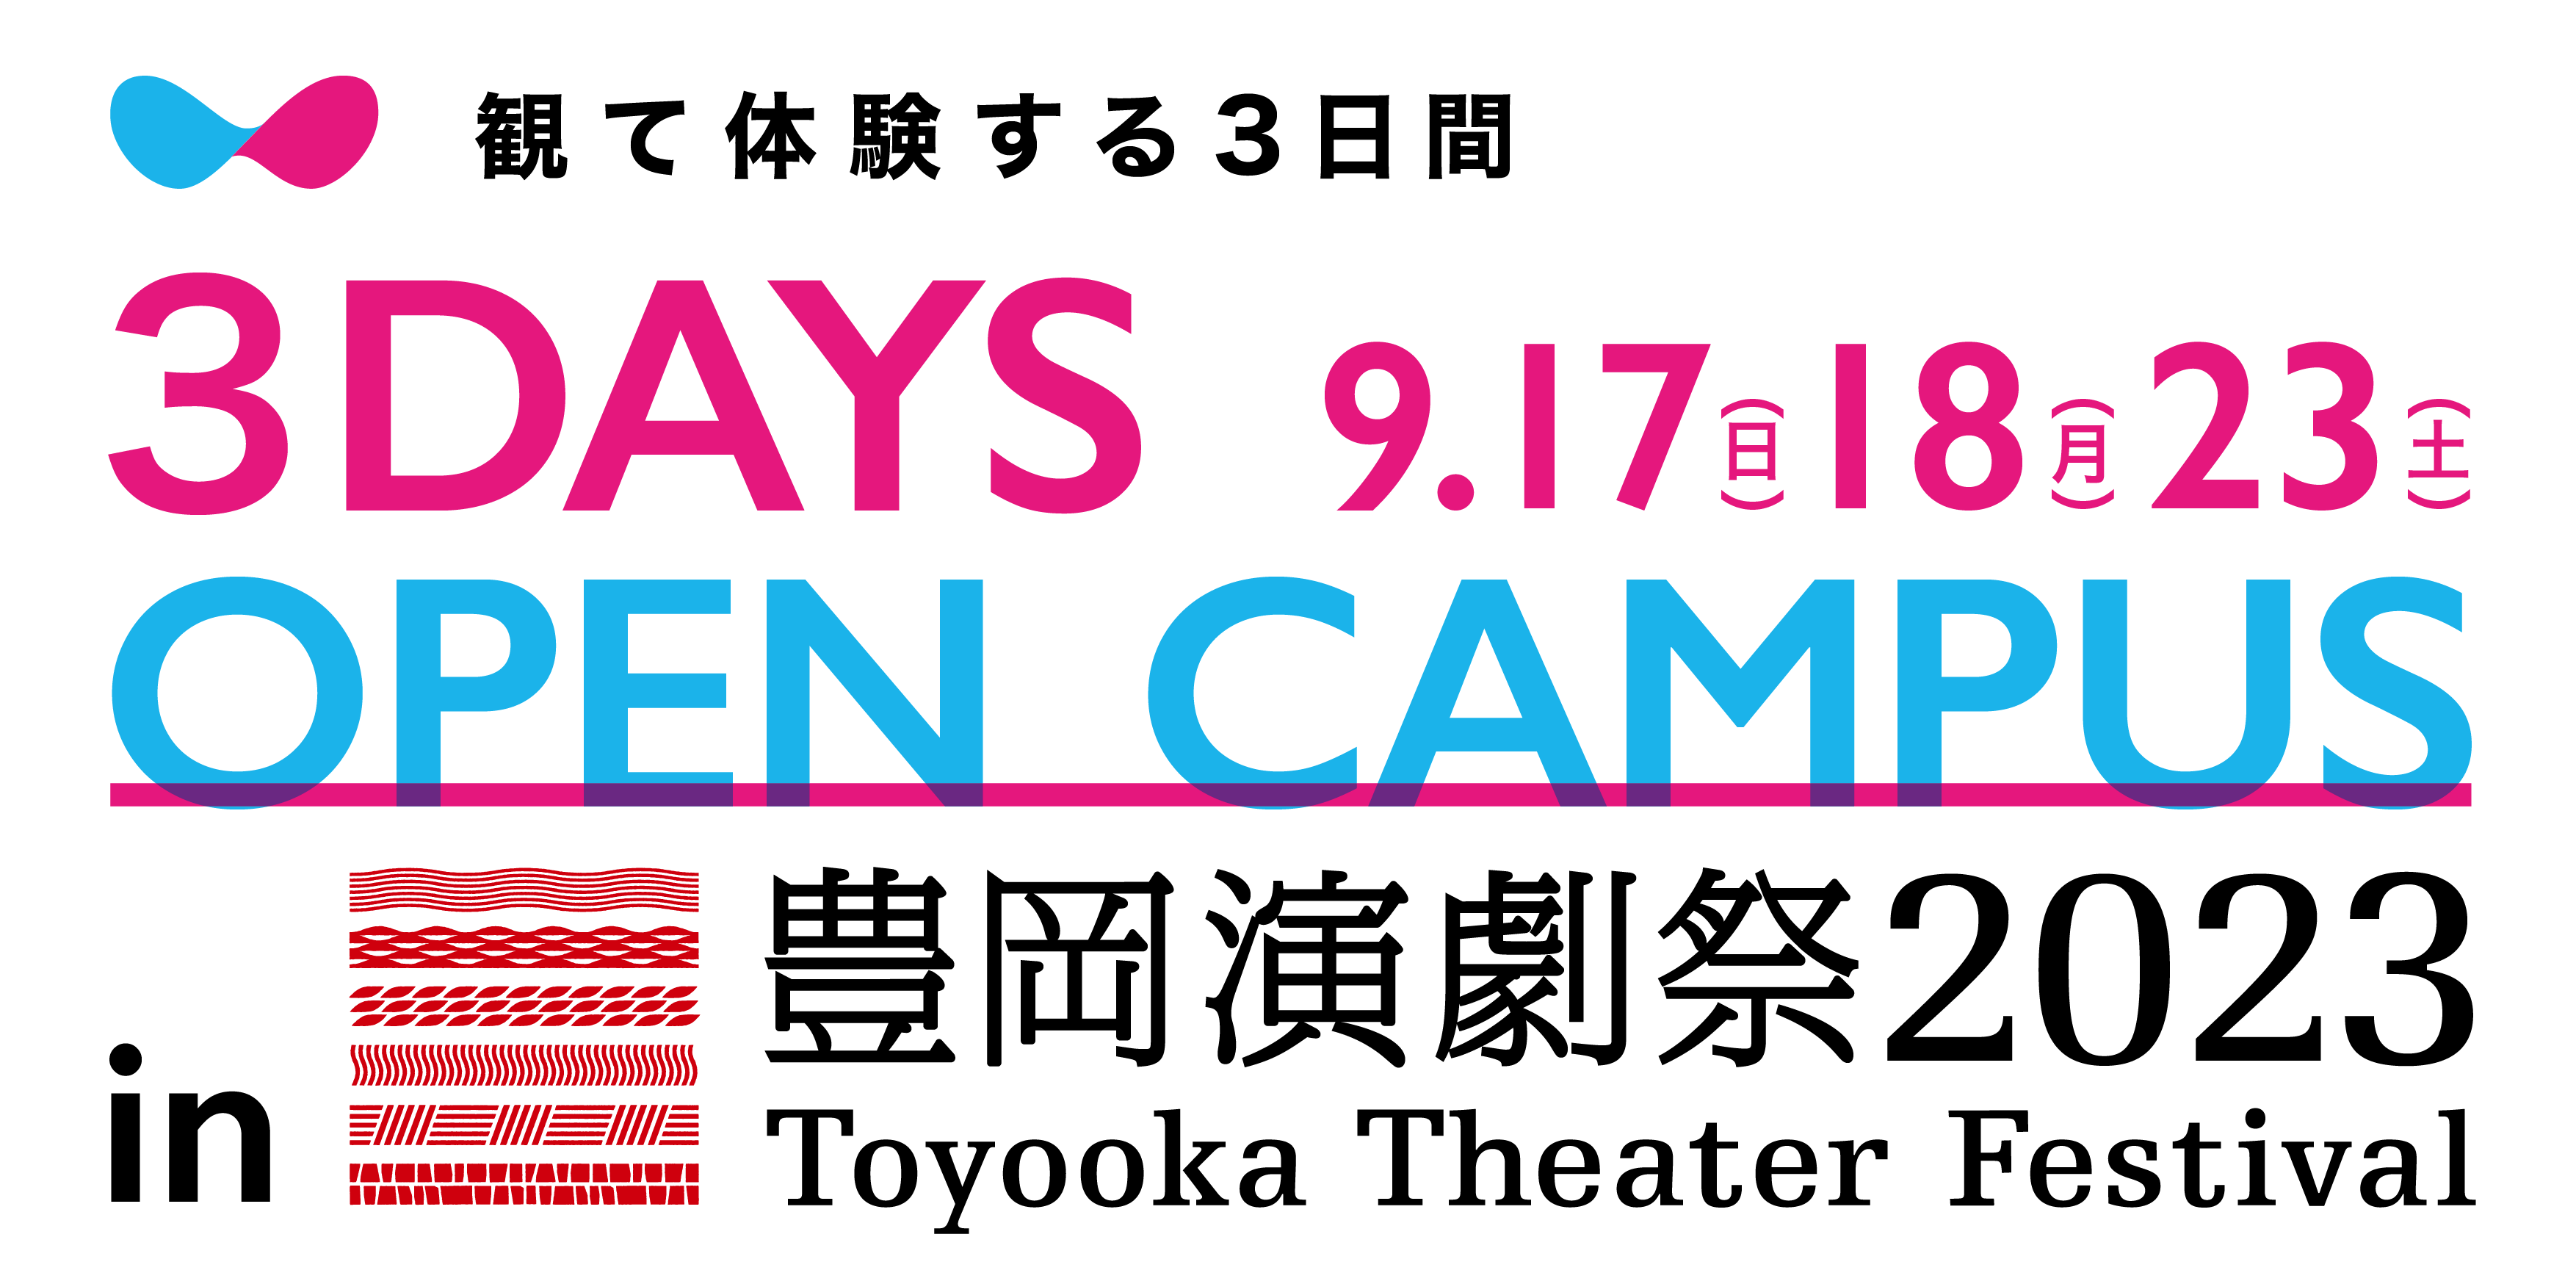 cat2023_banner_opencampus.png